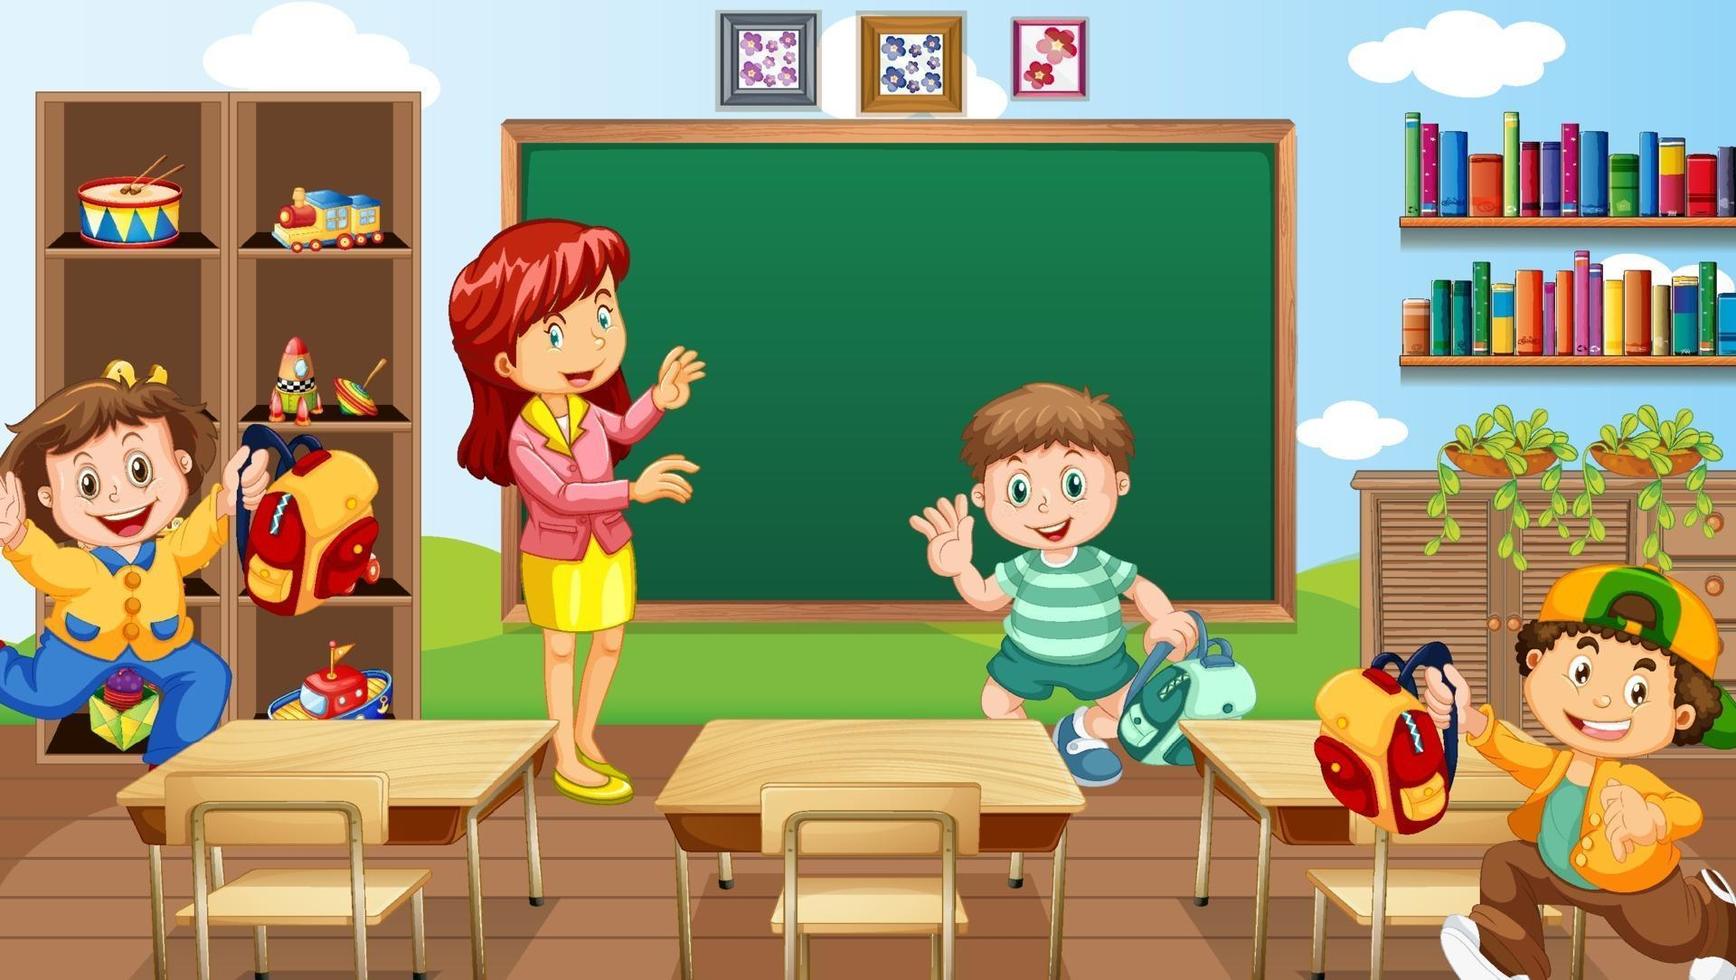 Classroom scene with a teacher and children vector